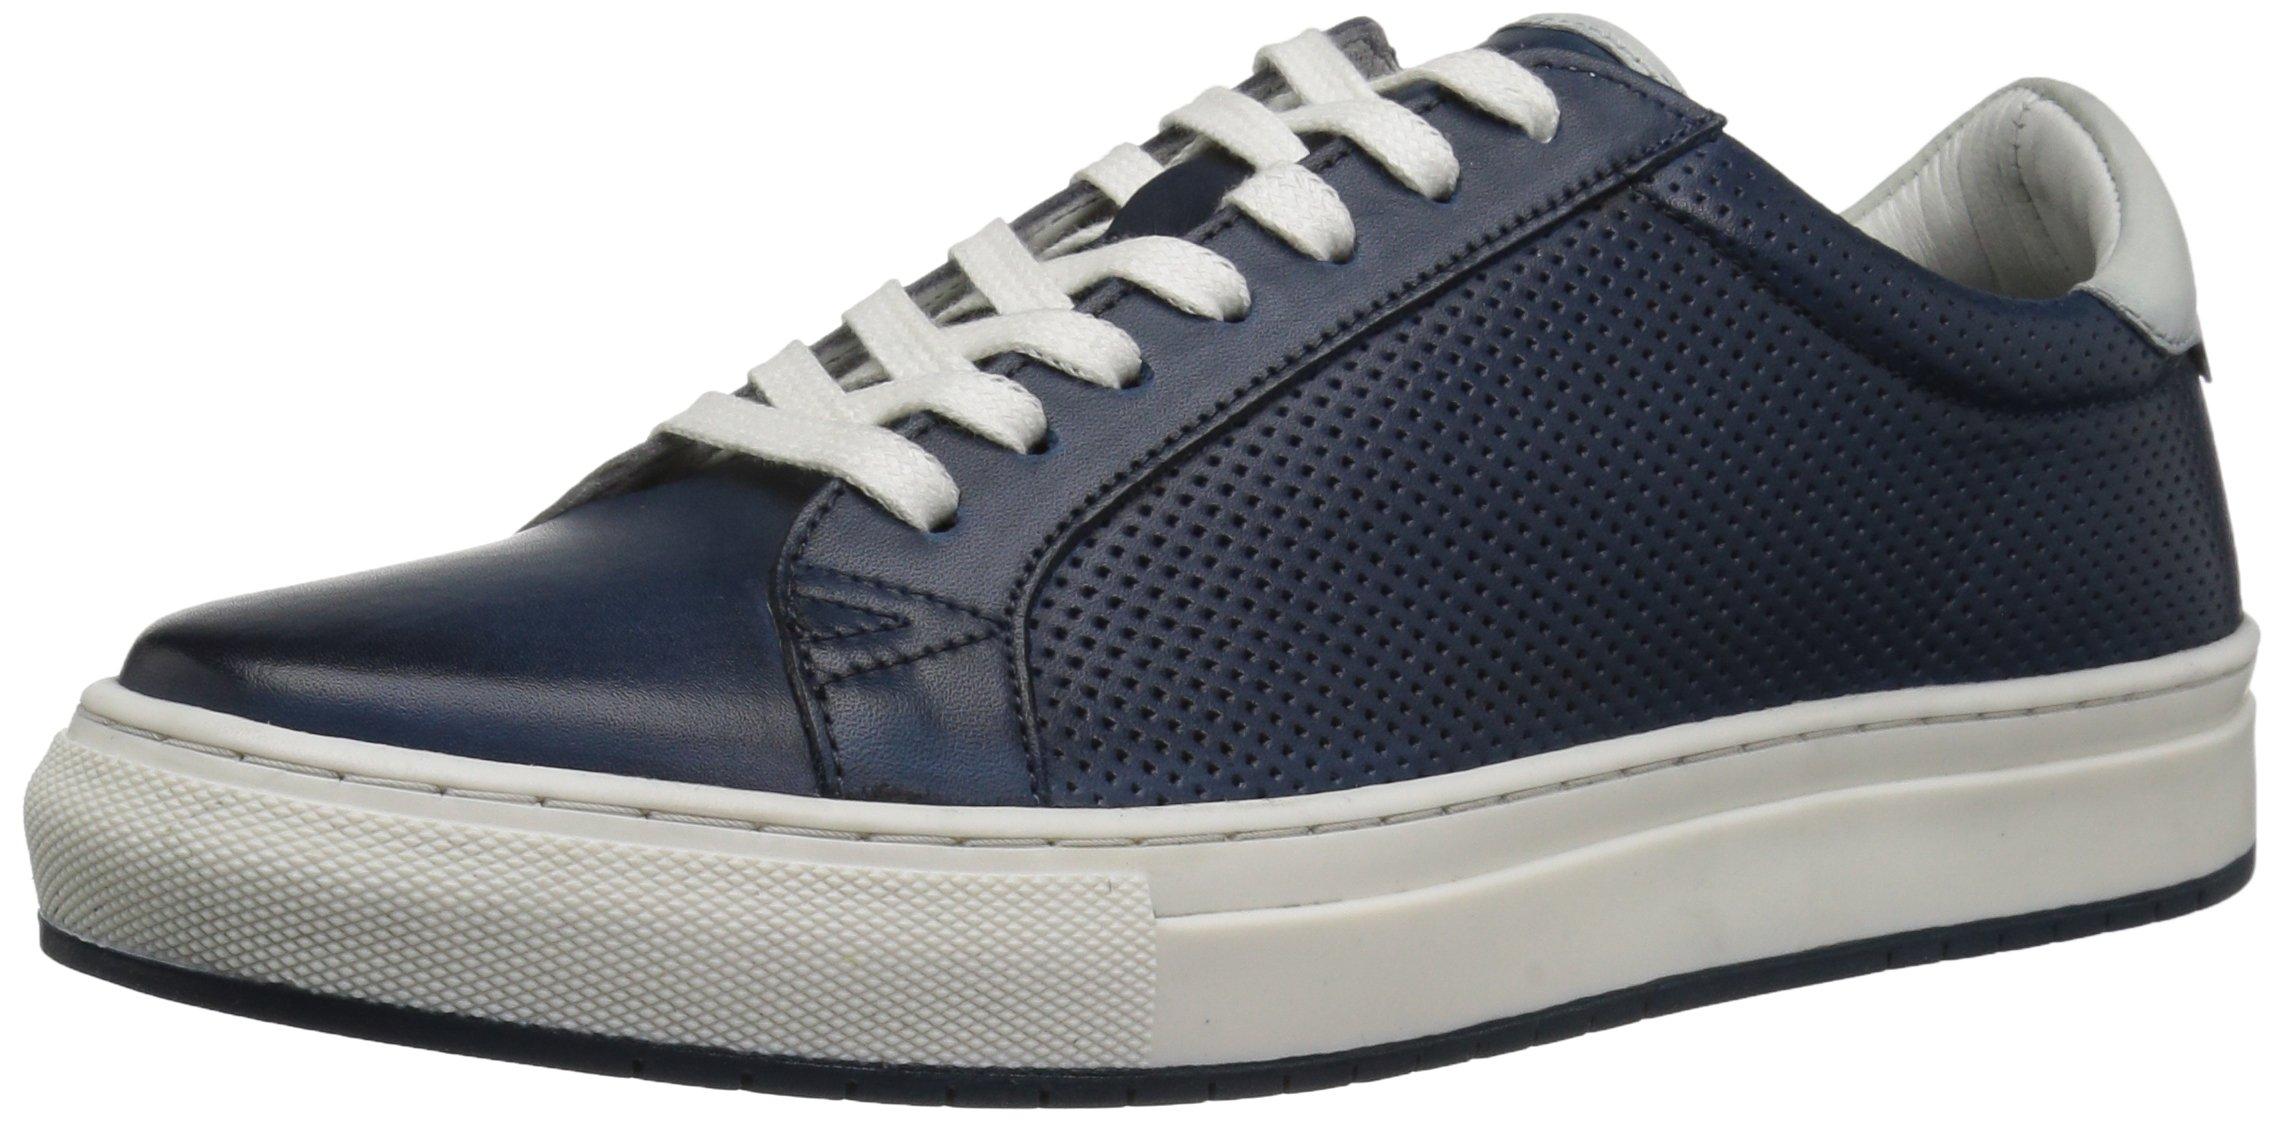 Kenneth Cole Leather Don Sneaker in Navy (Blue) for Men - Save 39% - Lyst